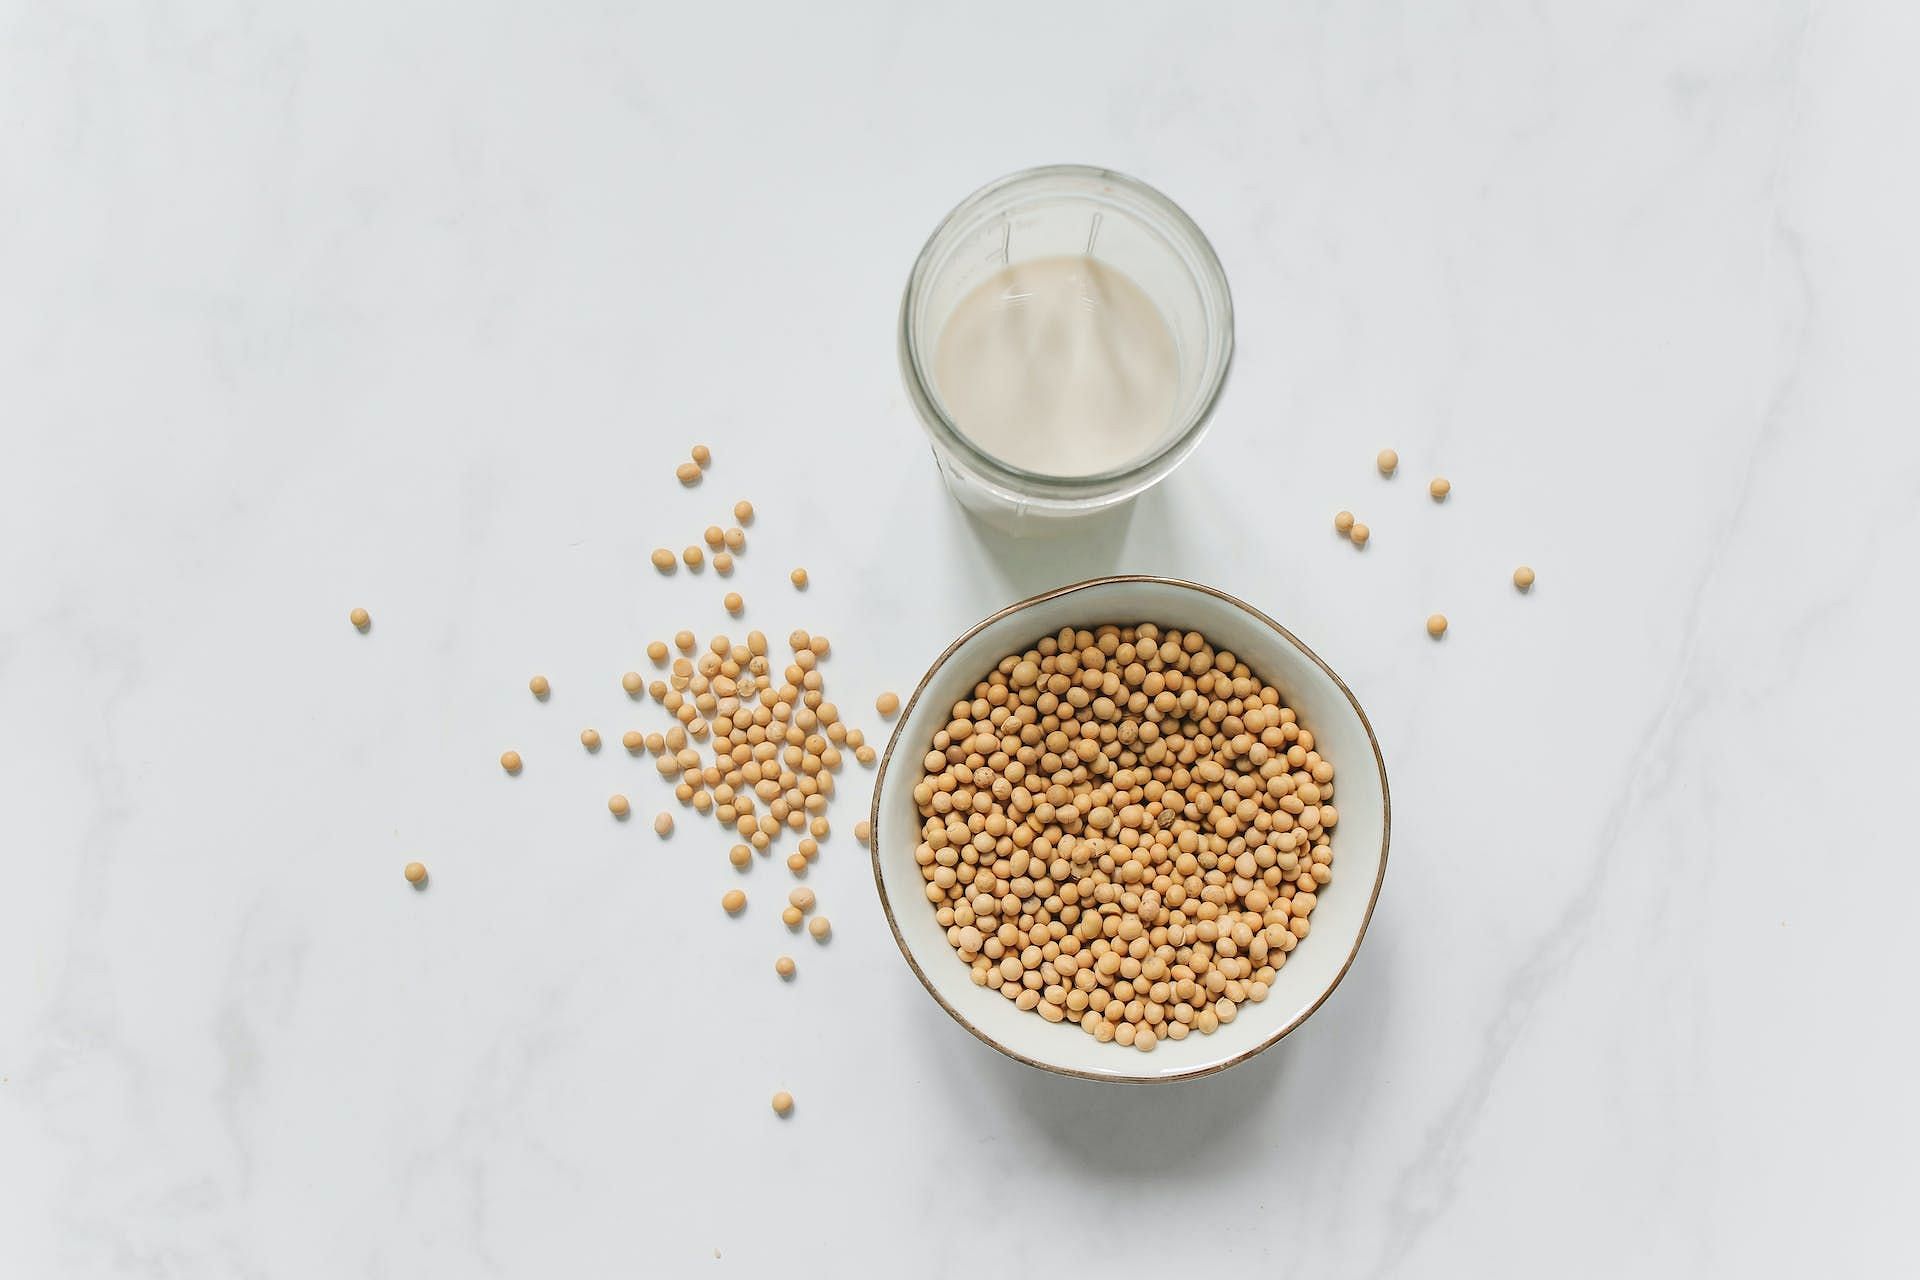 Soy products are foods to avoid with PCOS. (Image via Pexels/Polina Tankilevitch)